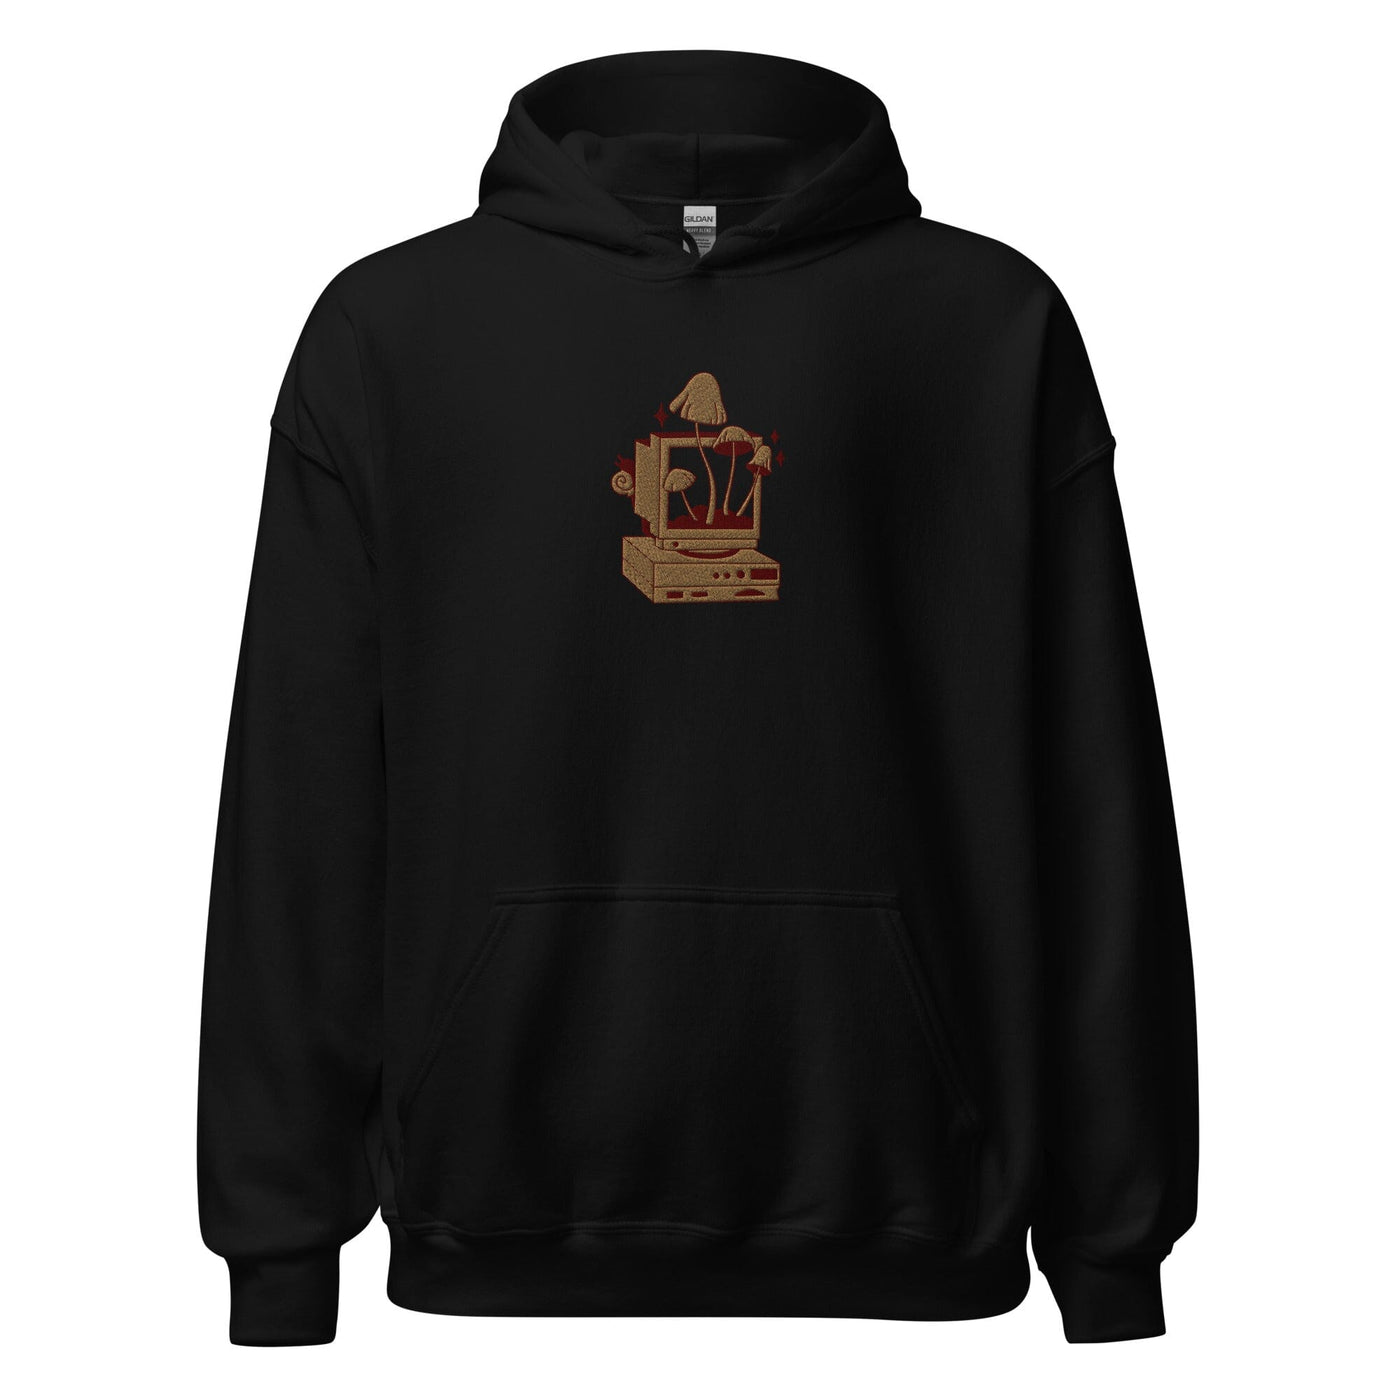 Cozy PC Gaming | Embroidered Unisex Hoodie | Cozy Gamer Threads & Thistles Inventory Black S 